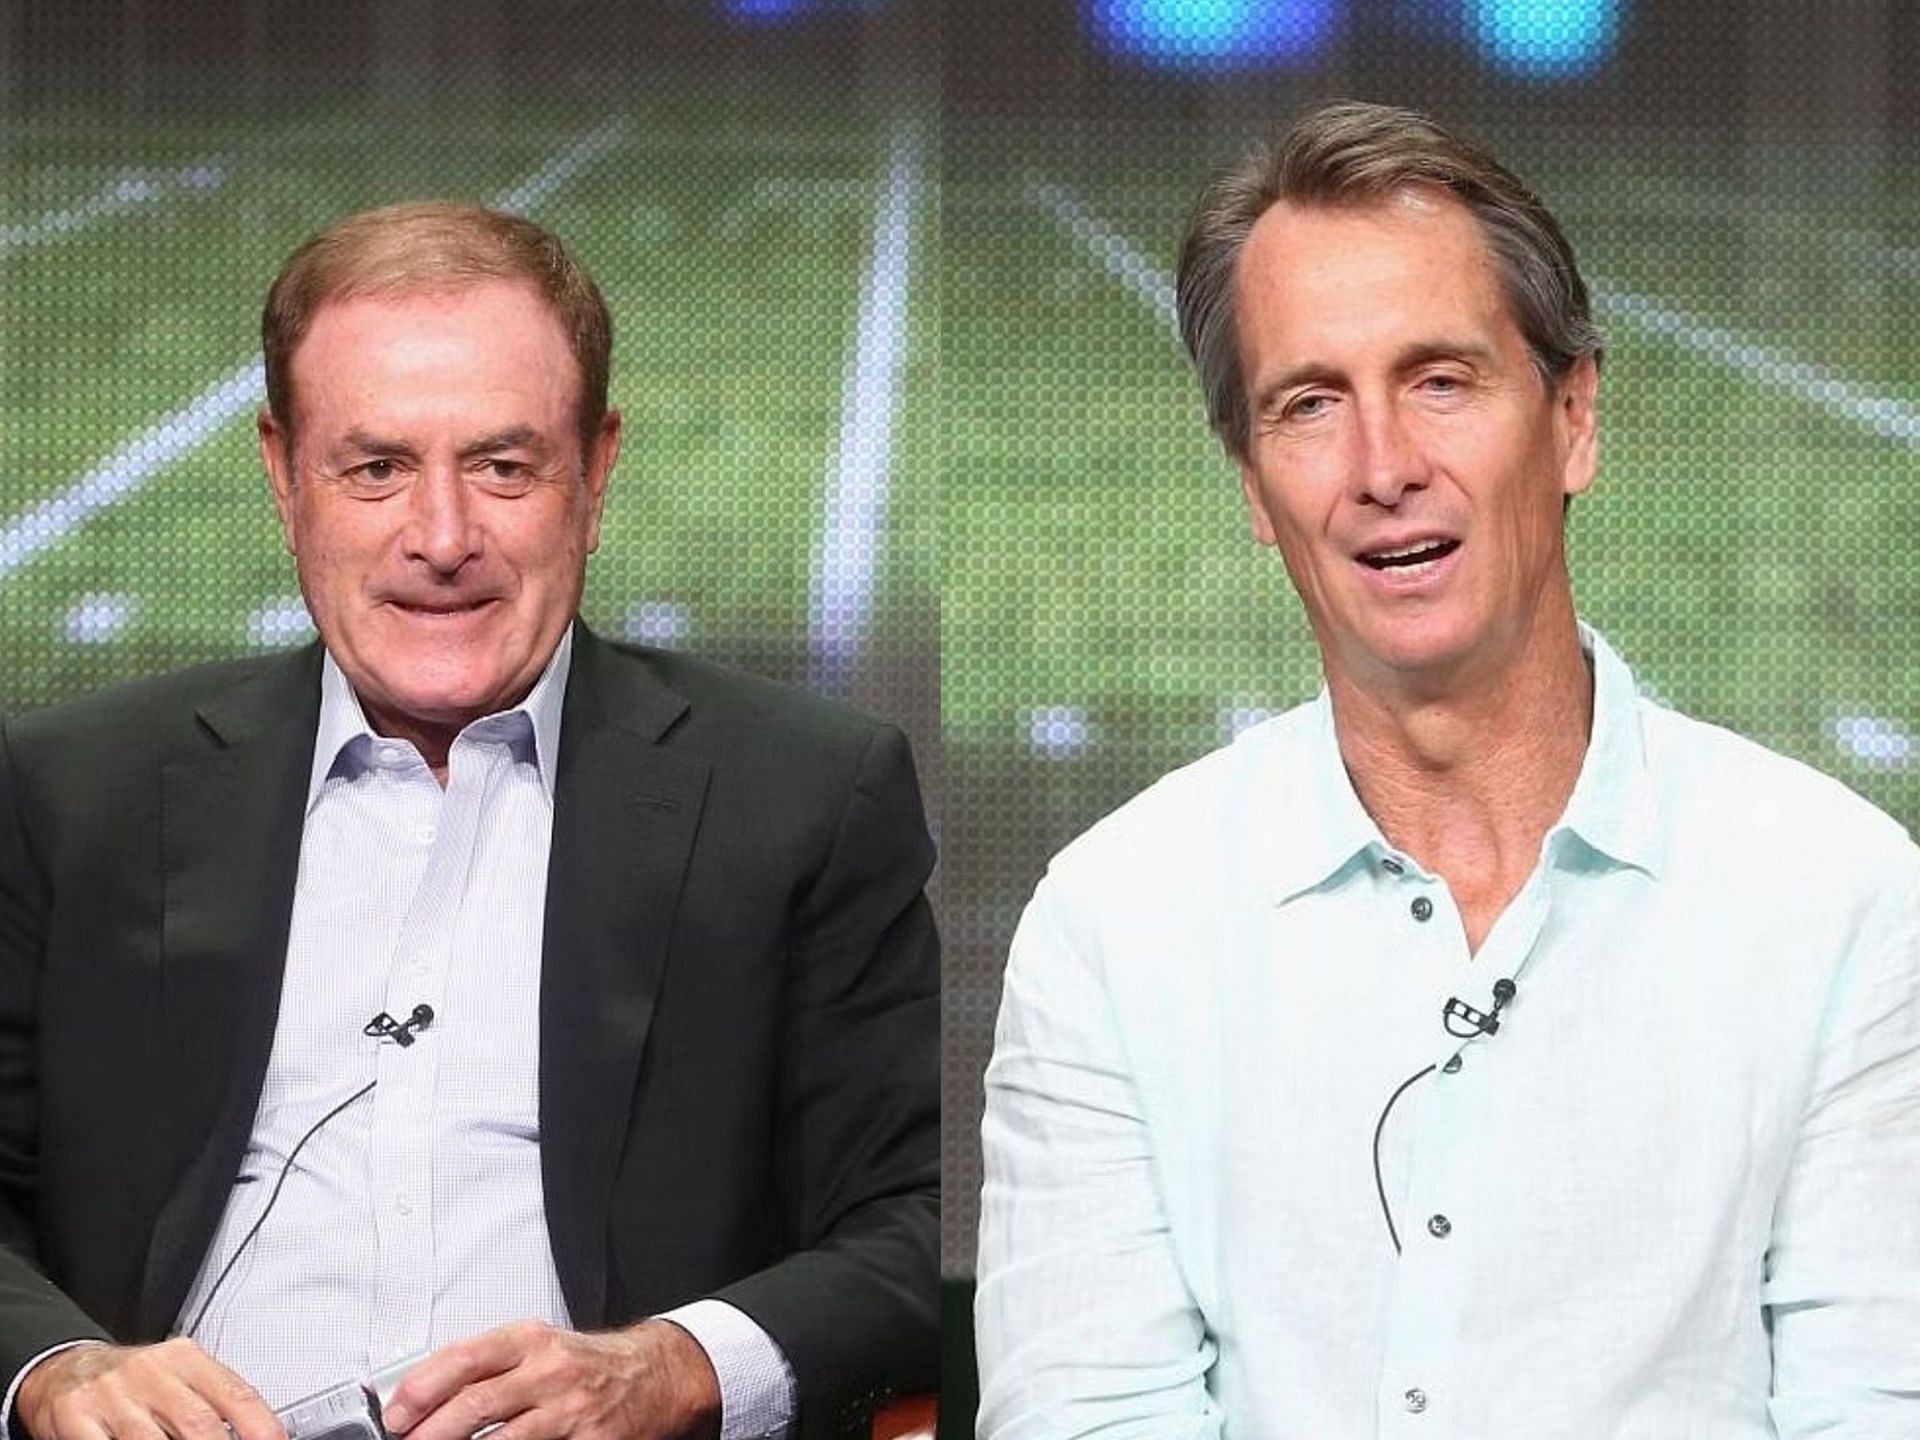 Without Collinsworth it's an L” - NFL fans left disappointed by NBC's  choice of color commentator in Al Michaels' return to network